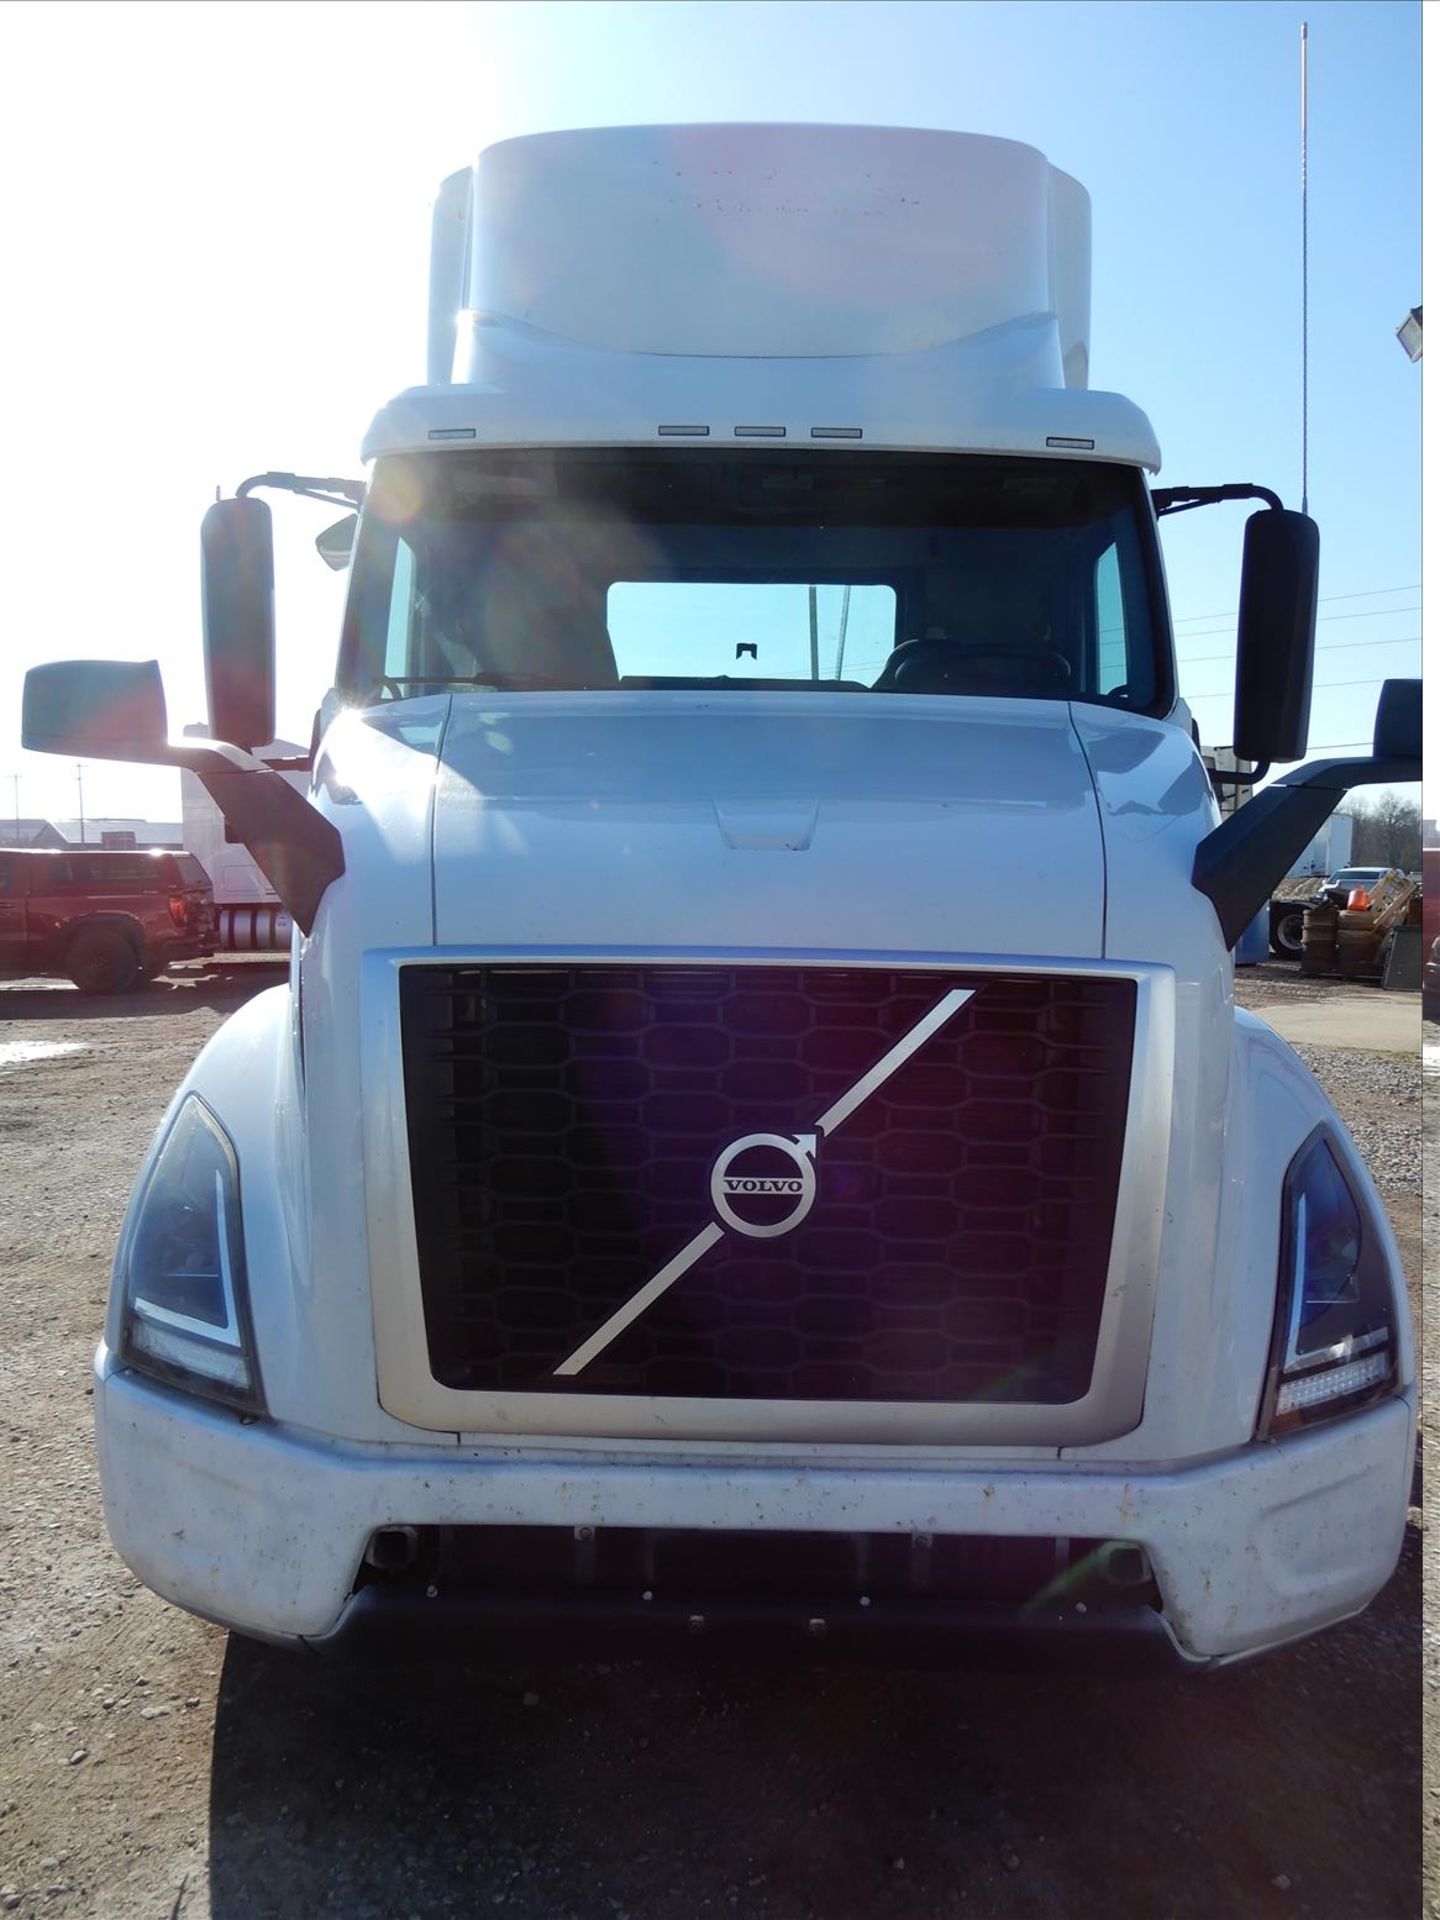 2019 Volvo VNR 300 Daycab Truck Tractor - Located in Indianapolis, IN - Image 2 of 61